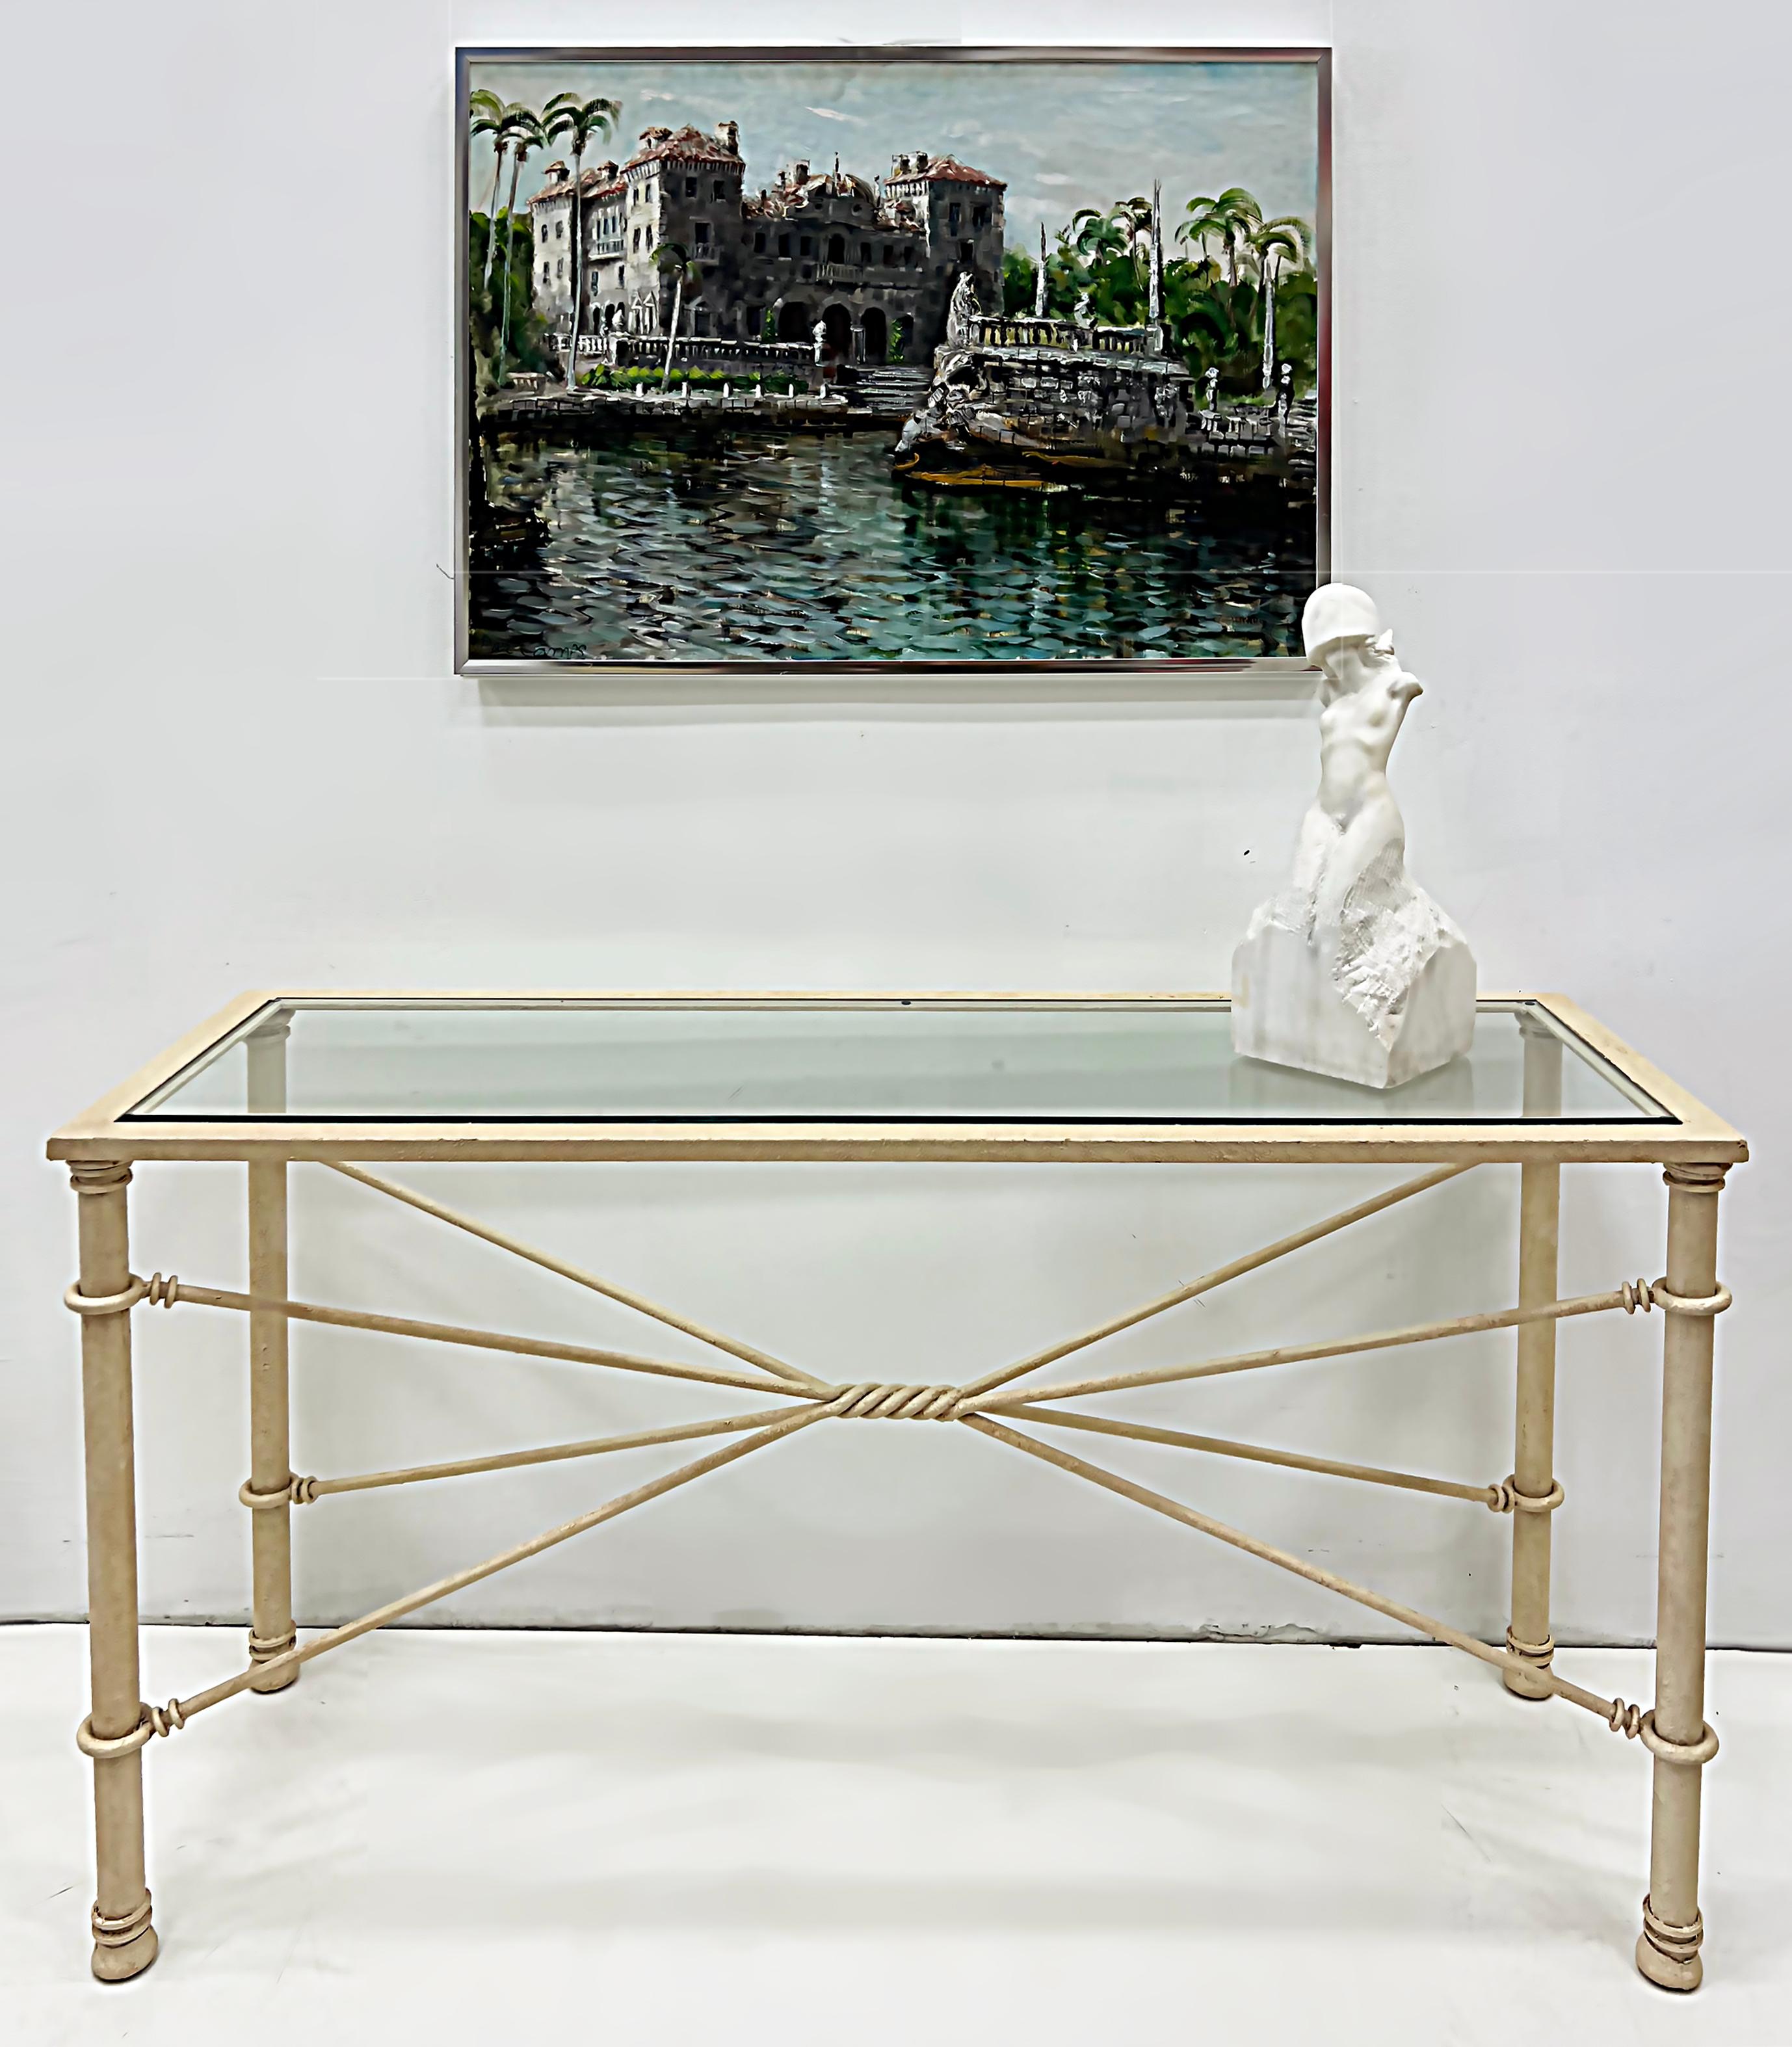 Brutalist Wrought-iron Console Table with Beveled Glass

Offered for sale is a 1980s John Dickinson style Brutalist wrought-iron console with an inset beveled glass top. The wrought-iron frame is quite substantial and has a lightly textured patina